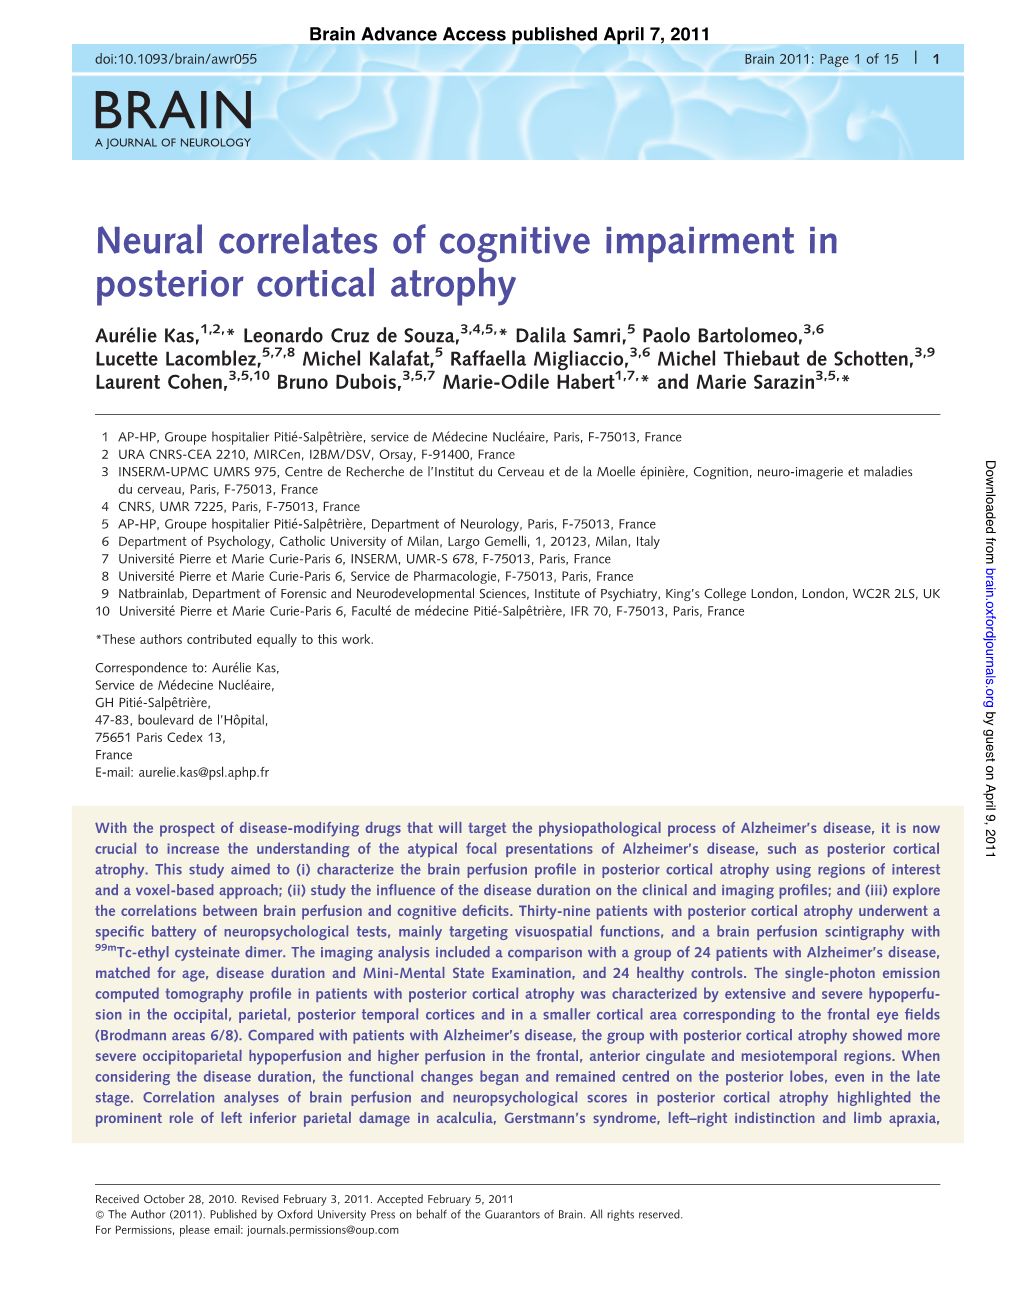 Neural Correlates of Cognitive Impairment in Posterior Cortical Atrophy